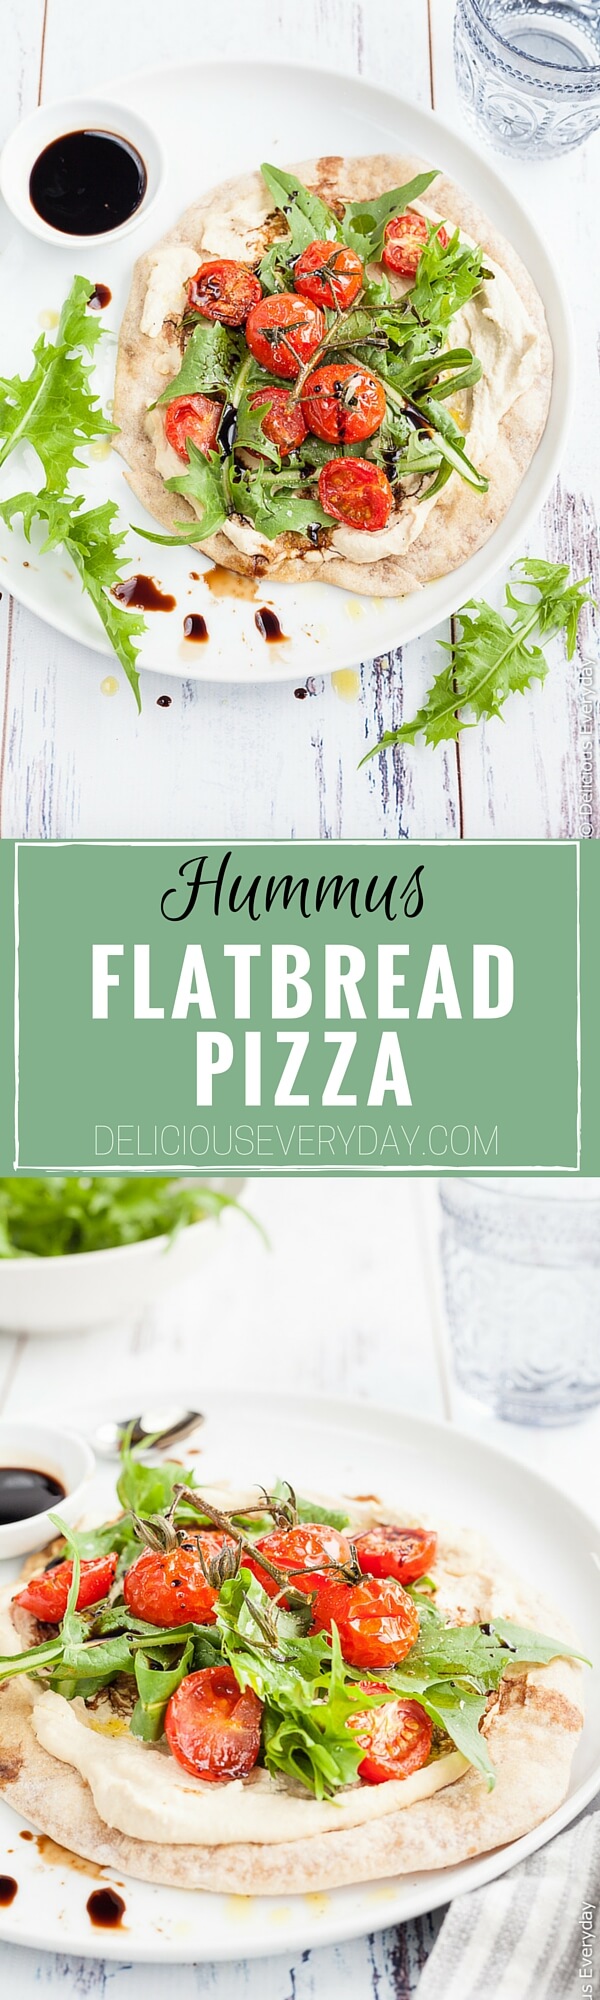 Hummus and Tomato Vegan Flatbread Pizza - A quick, easy and healthy light meal. Flatbreads are lightly toasted until crisp and topped with smooth creamy hummus, sweet cherry tomatoes, dandelion greens and tart balsamic for a satisfying meat-free lunch. | click for the recipe